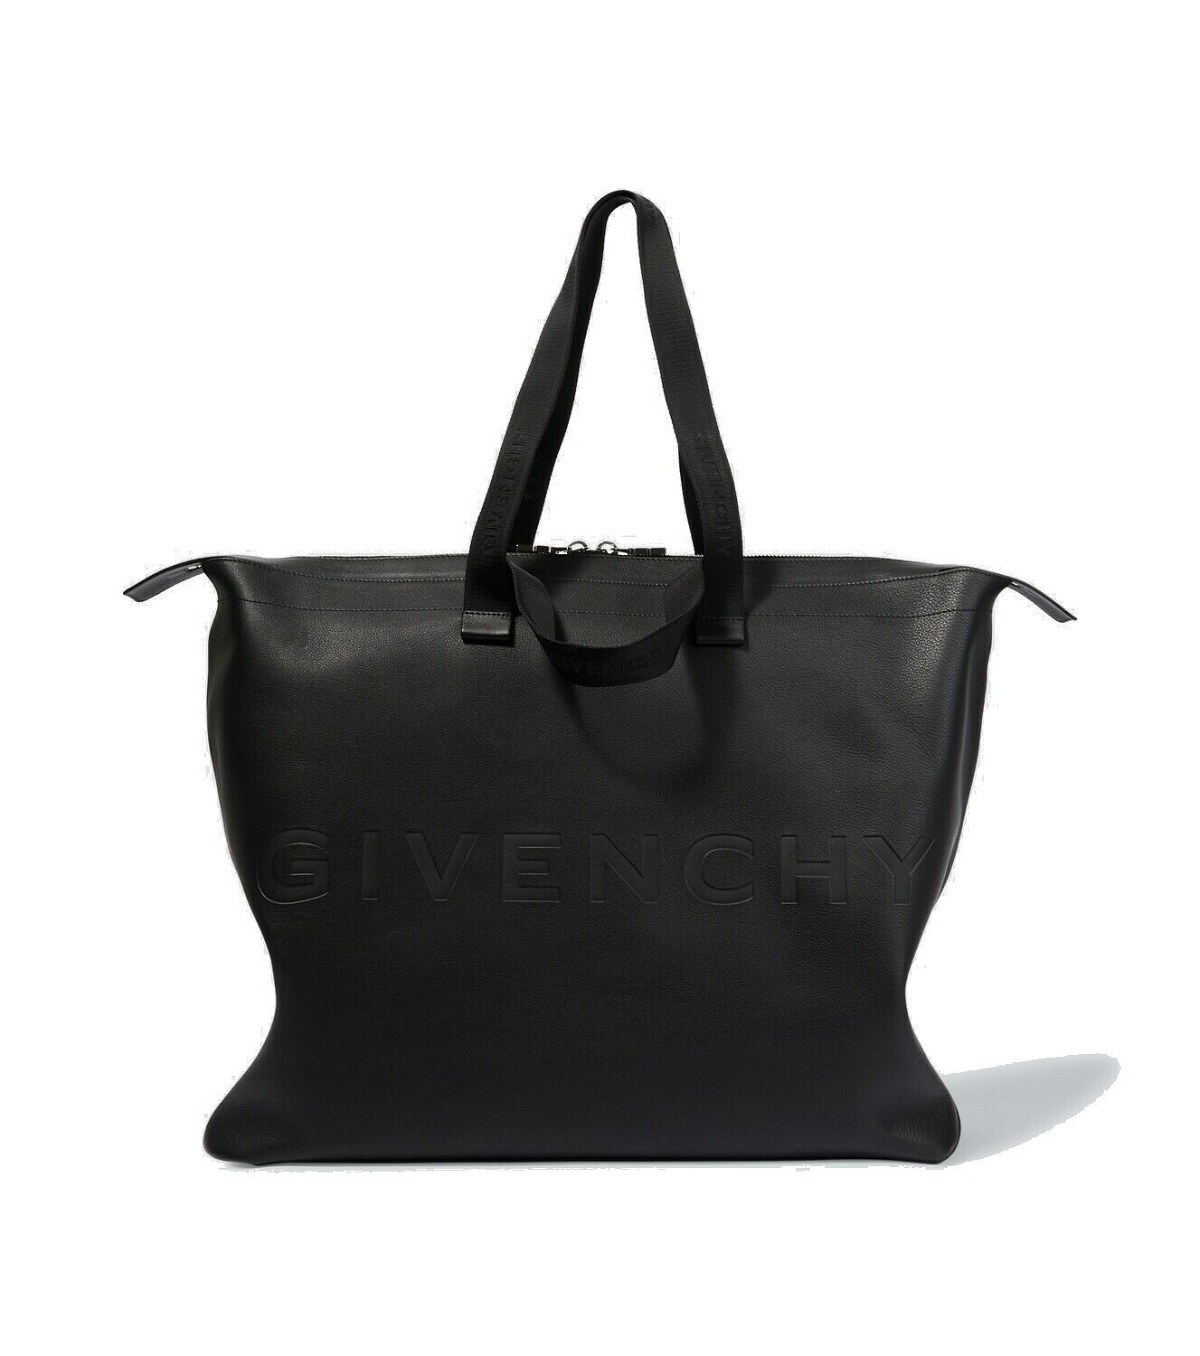 Givenchy G-Shopper Large leather tote bag Givenchy